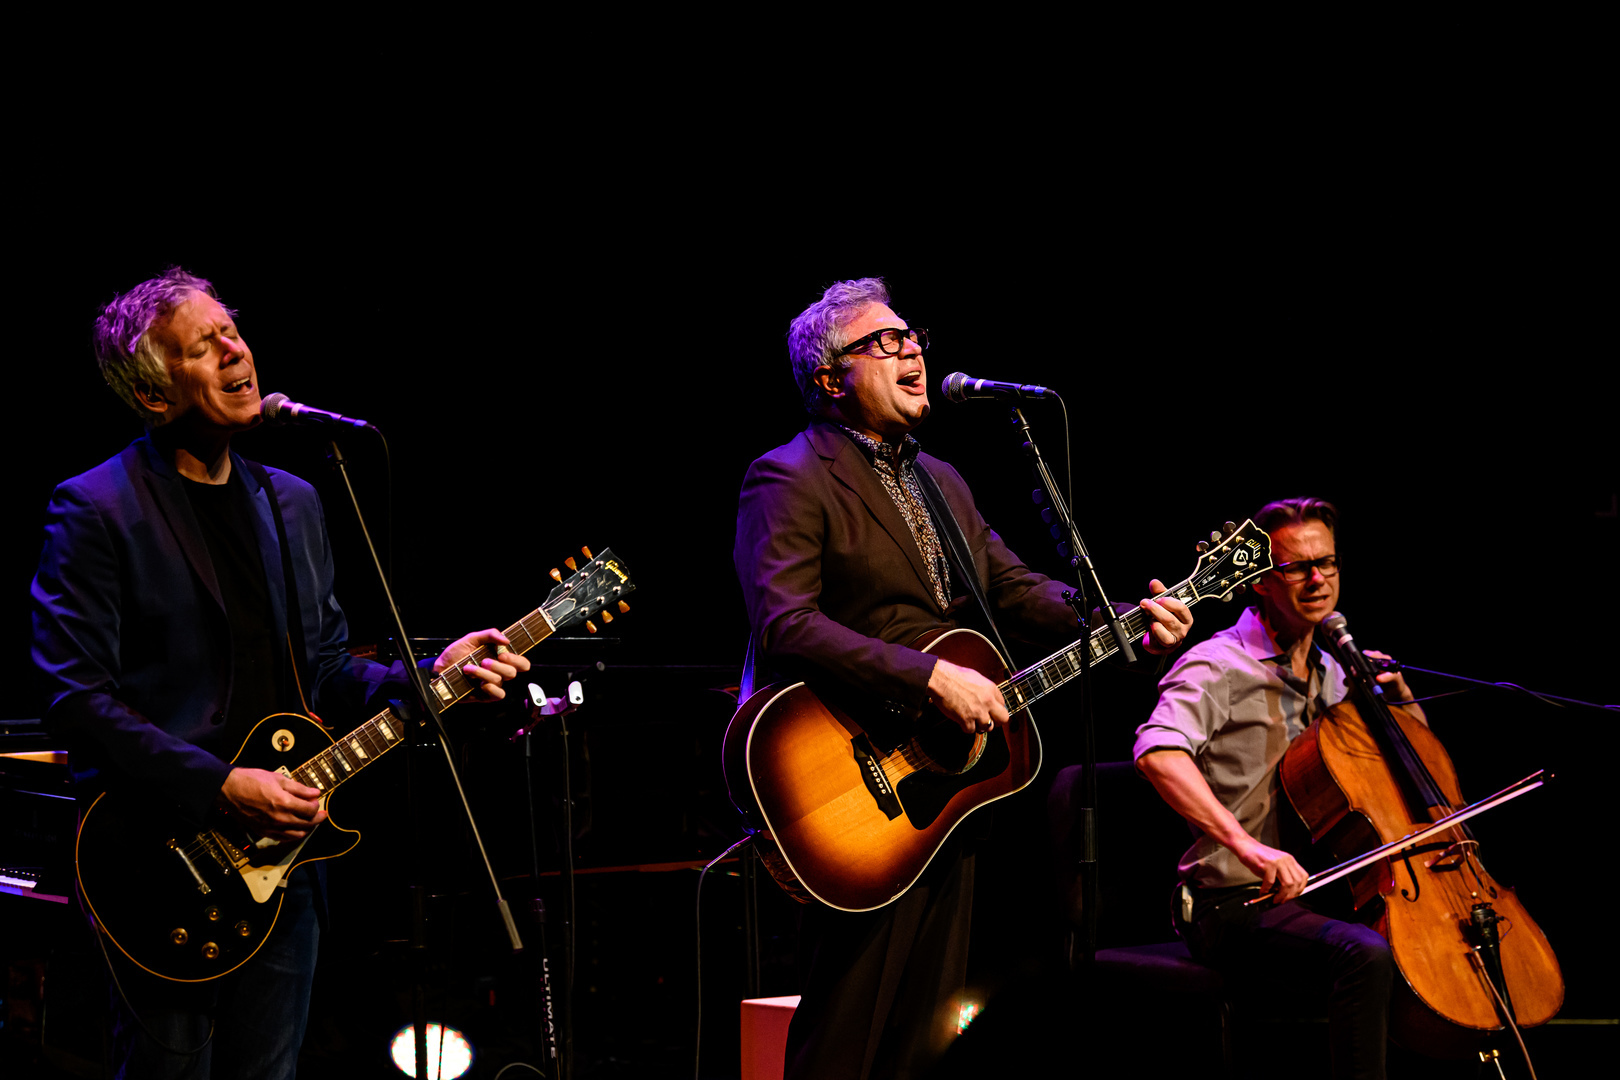 Steven Page formerly of Barenaked Ladies in Bloomington, IN on May 4, Bloomington, Indiana, United States